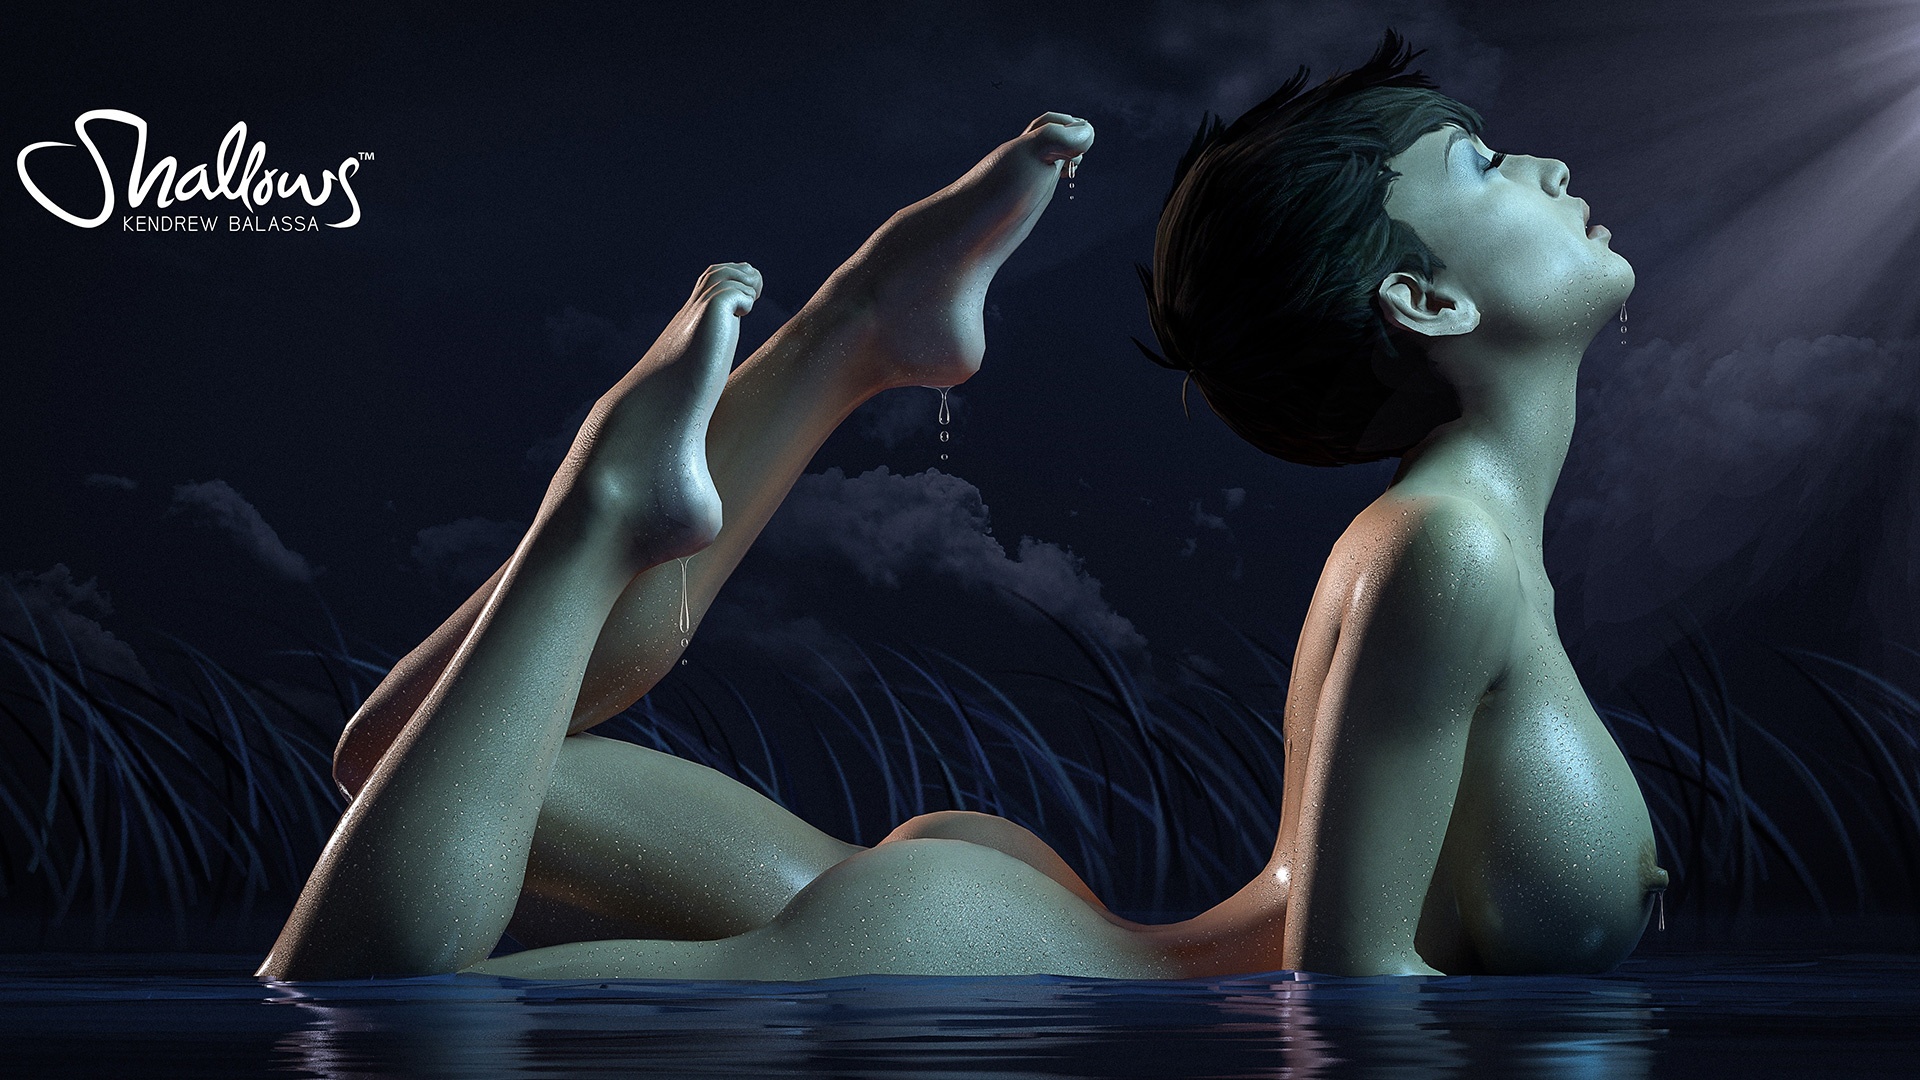 Nude and wet cgi babe 1920x1080 Wallpaper.